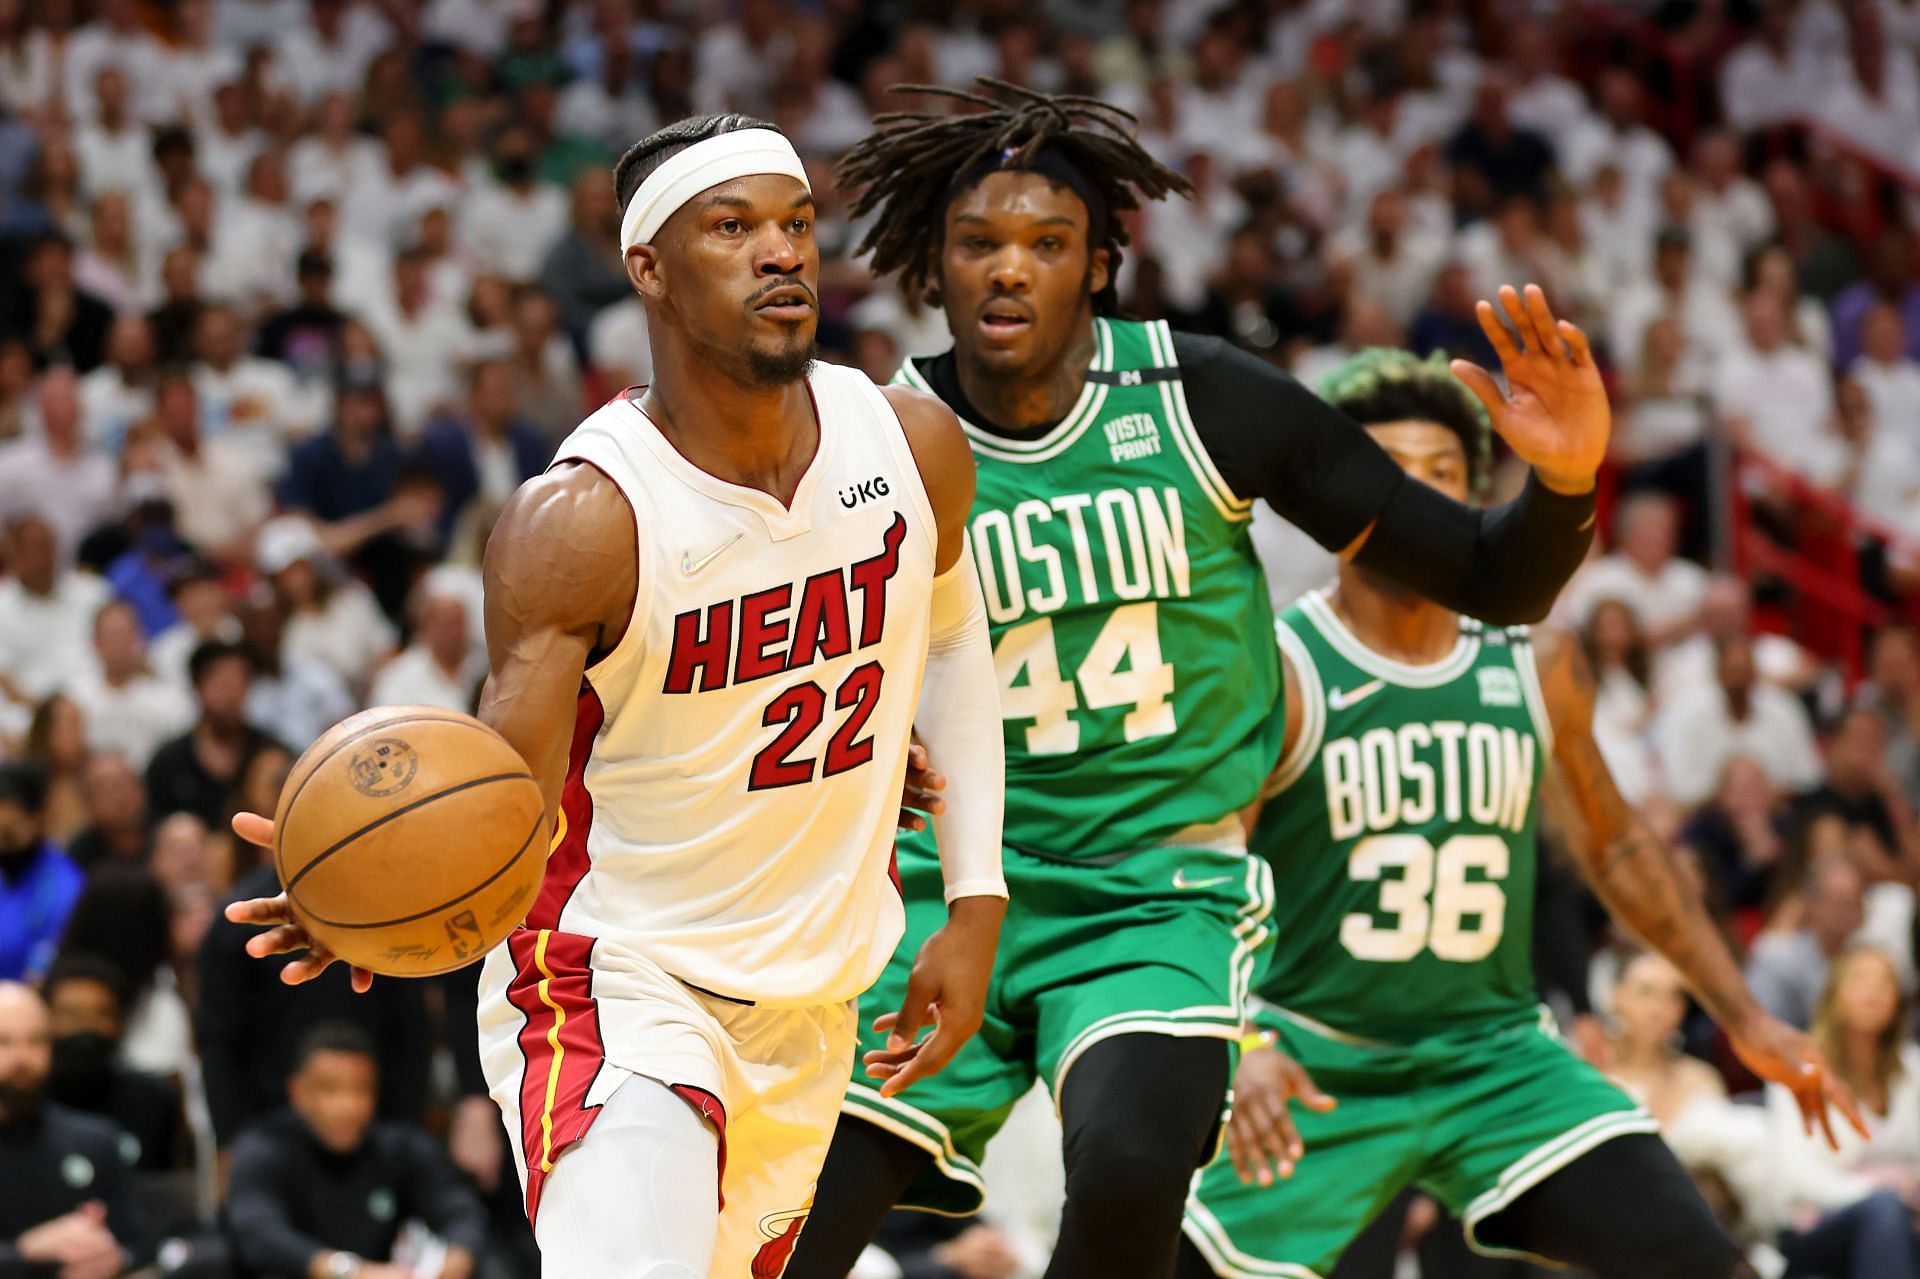 Jimmy Butler #22 of the Miami Heat dribbles against Robert Williams III #44 of the Boston Celtics